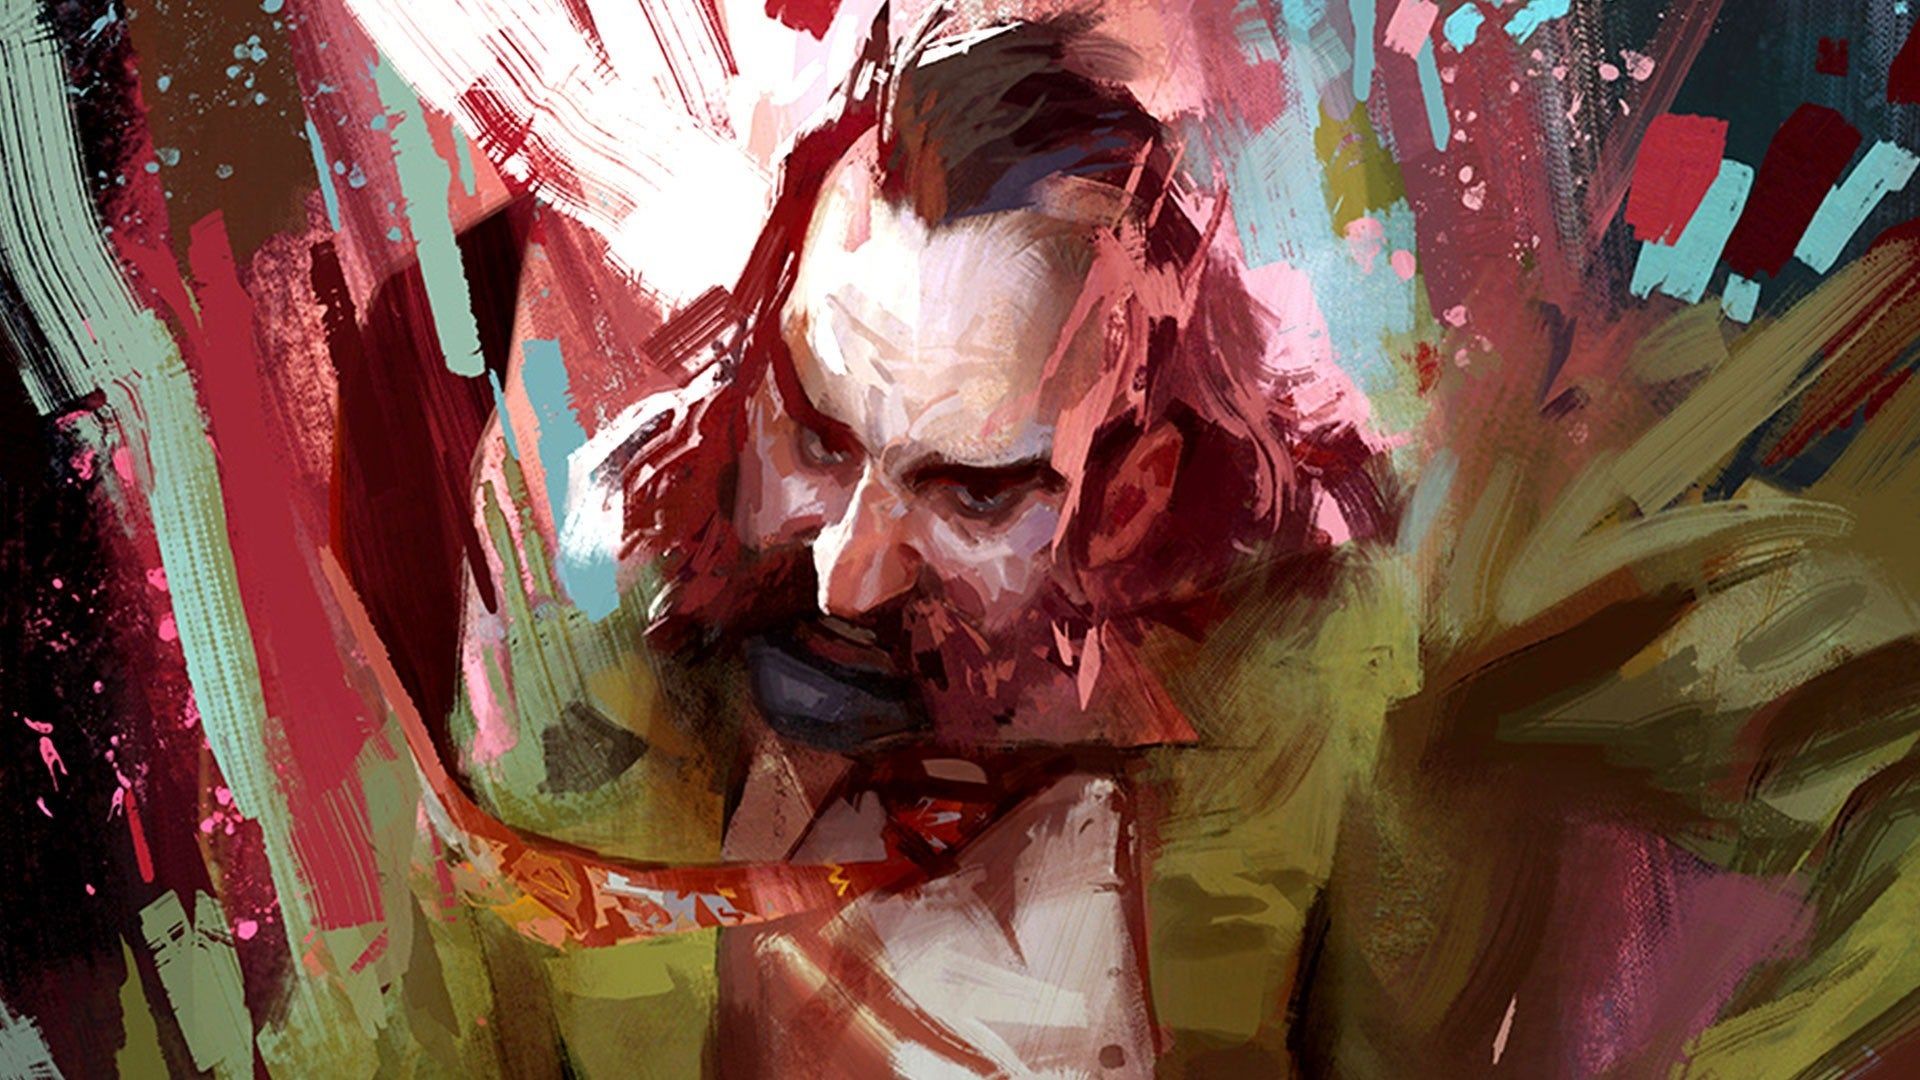 Disco Elysium Is a Dungeons & Dragons Experience for Your Inner Detective